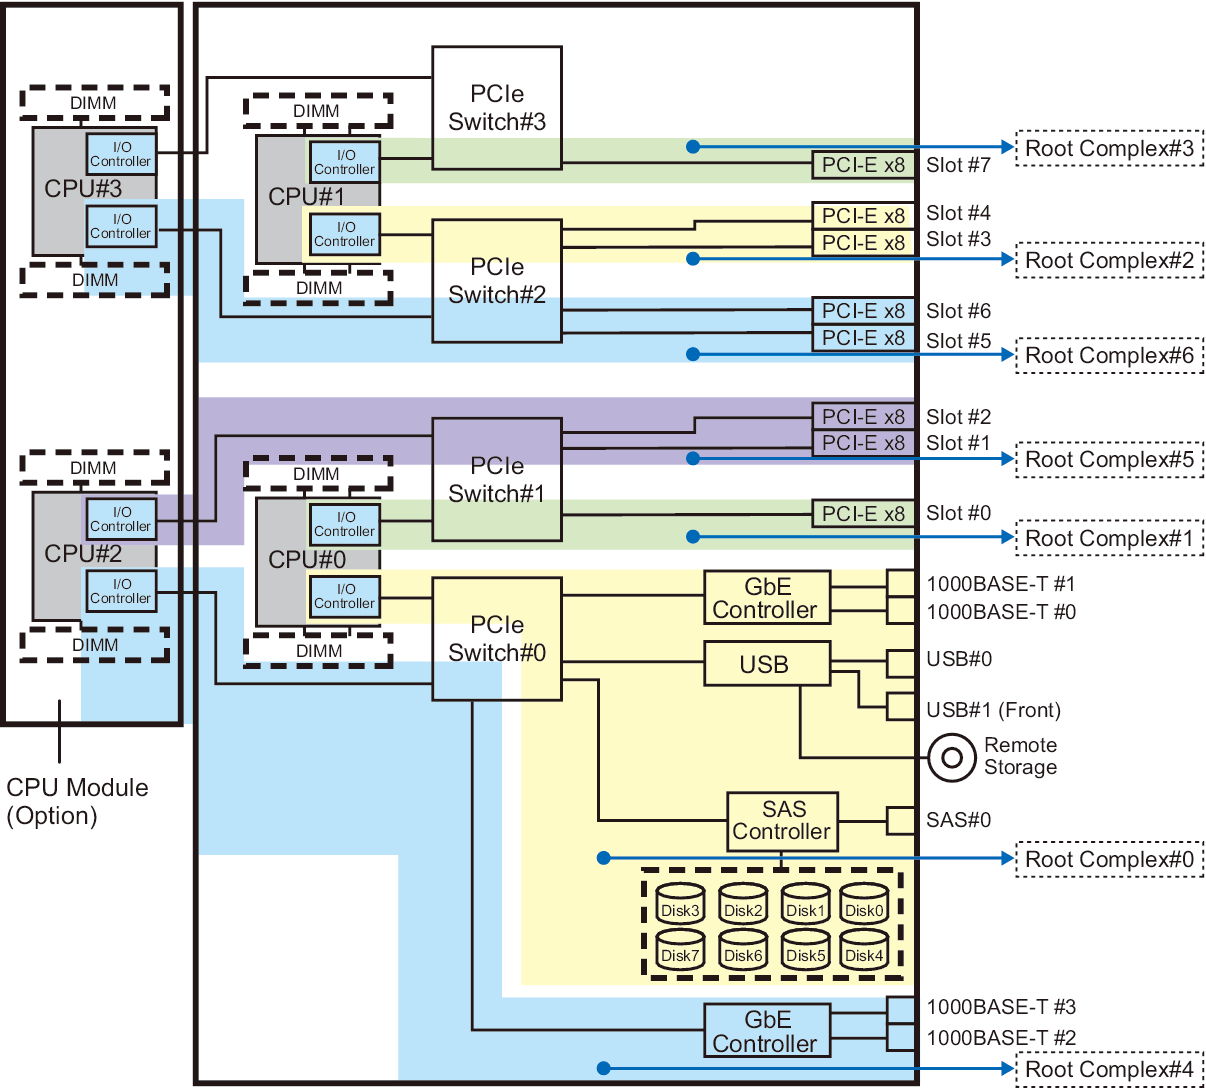 Figure 3-3  Hardware Configuration Diagram of the SPARC M10-4S With 4 CPUs (7 Root Complexes)